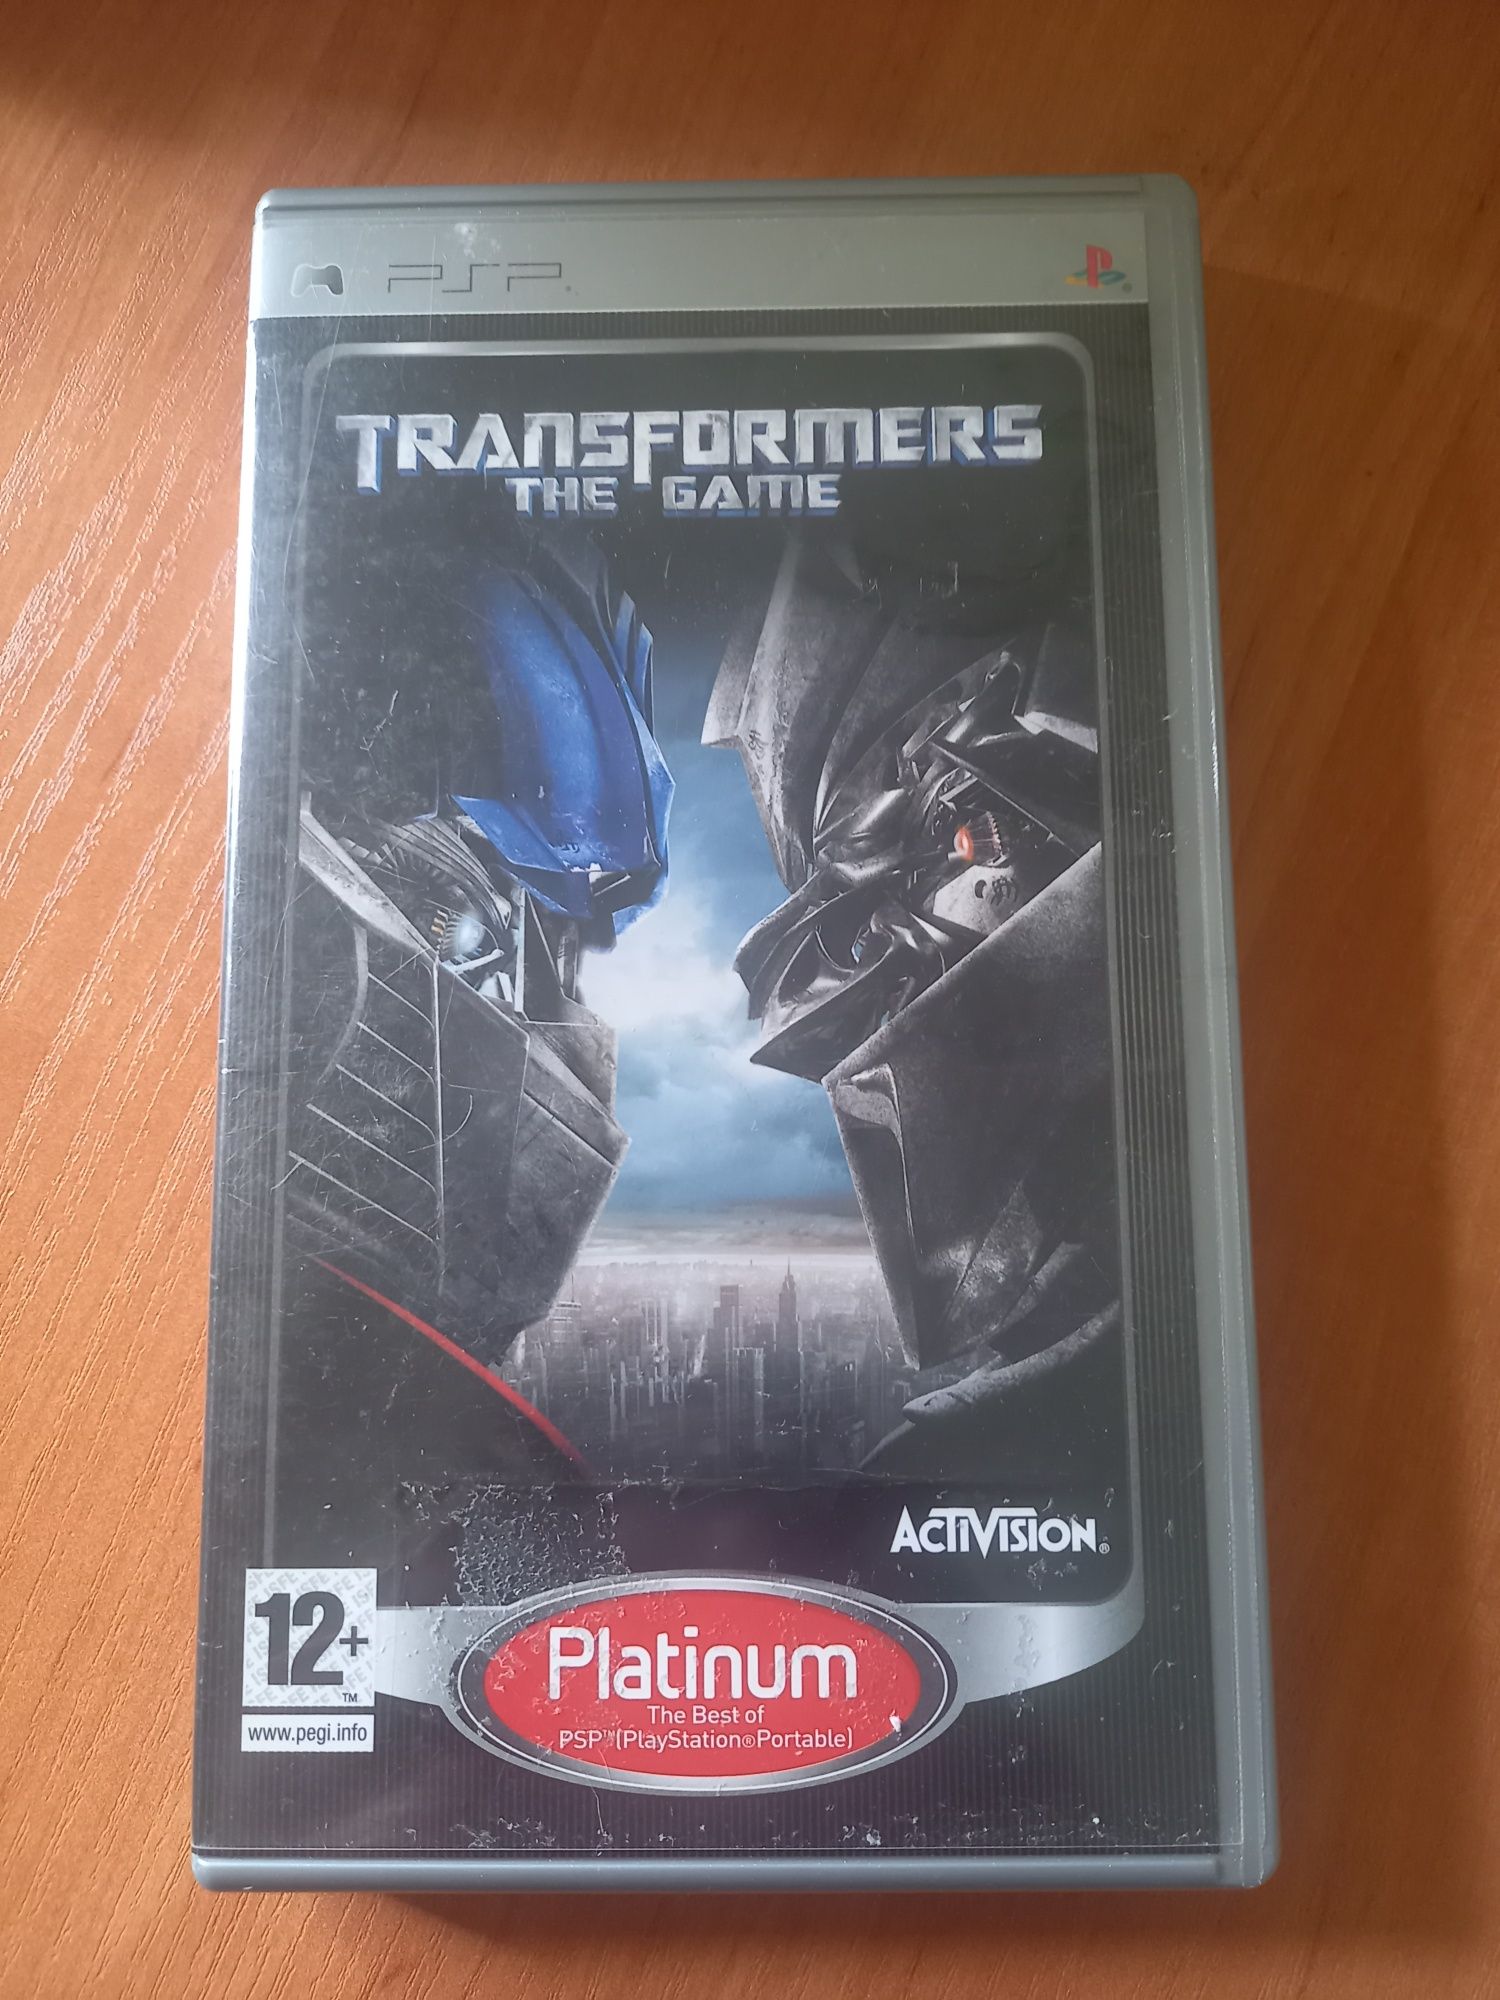 Gra Sony psp transformers the game